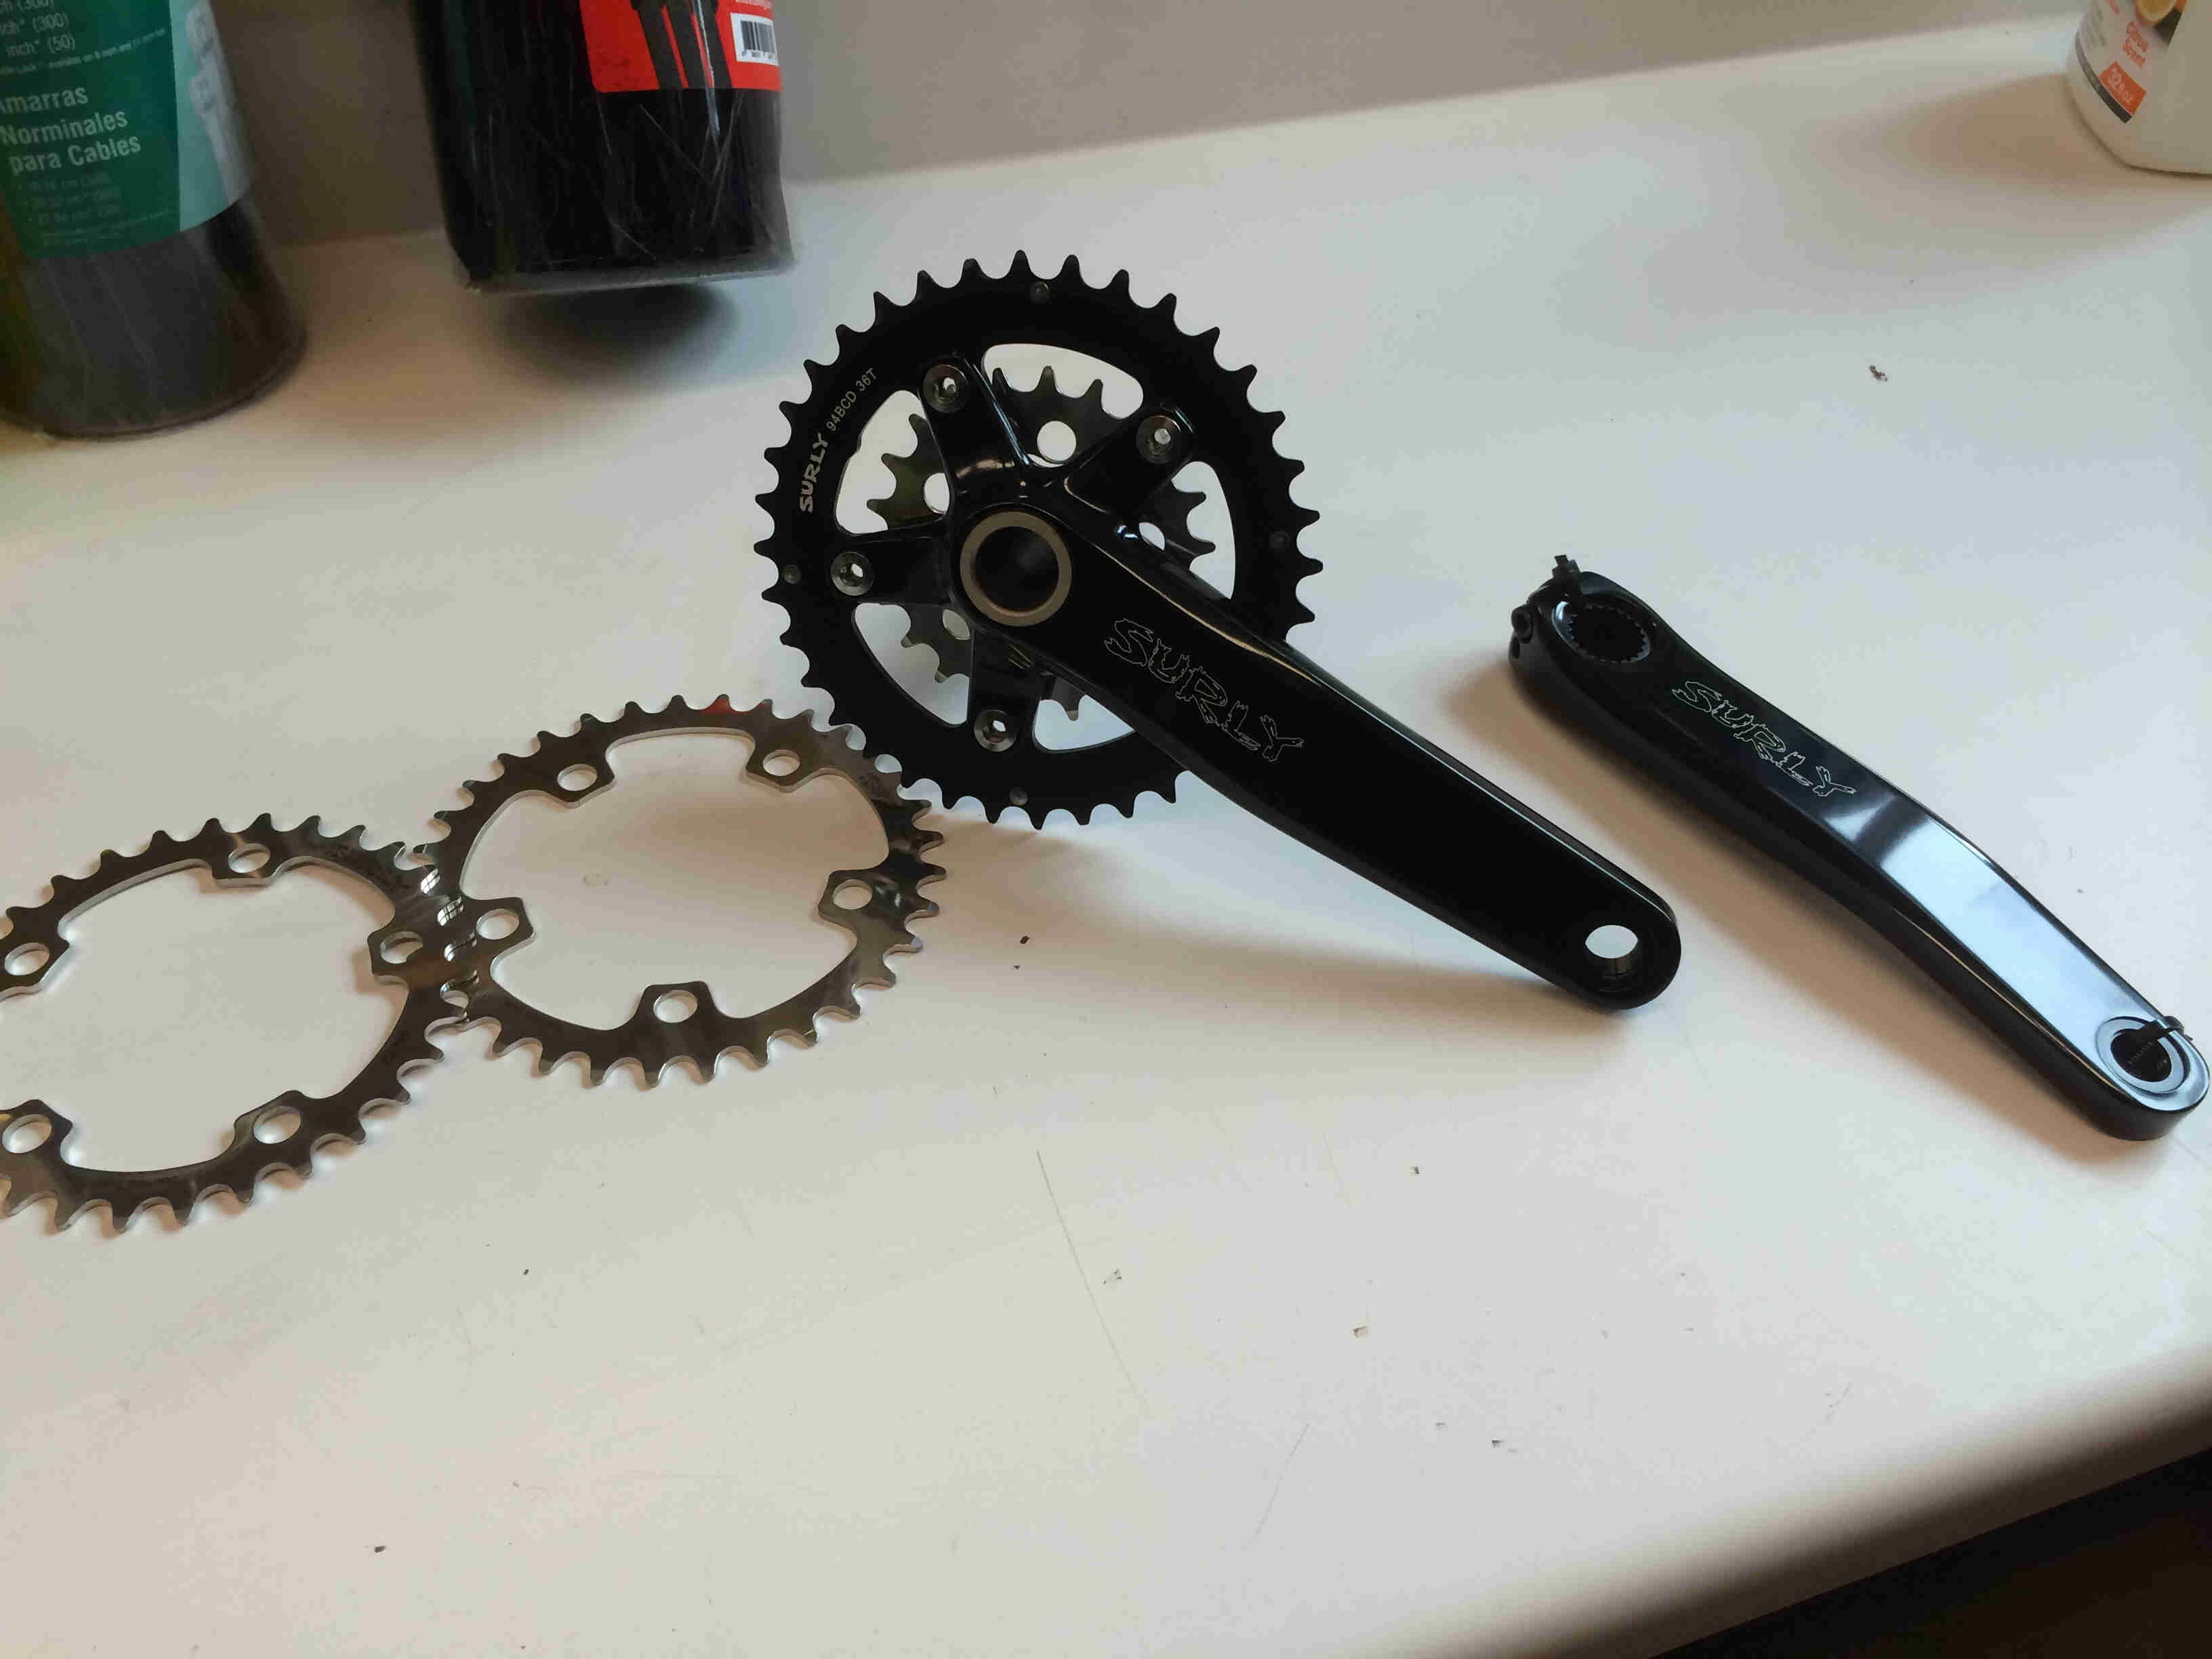 Two chainrings, sitting on a table, next to a Surly Bikes O.D Crankset